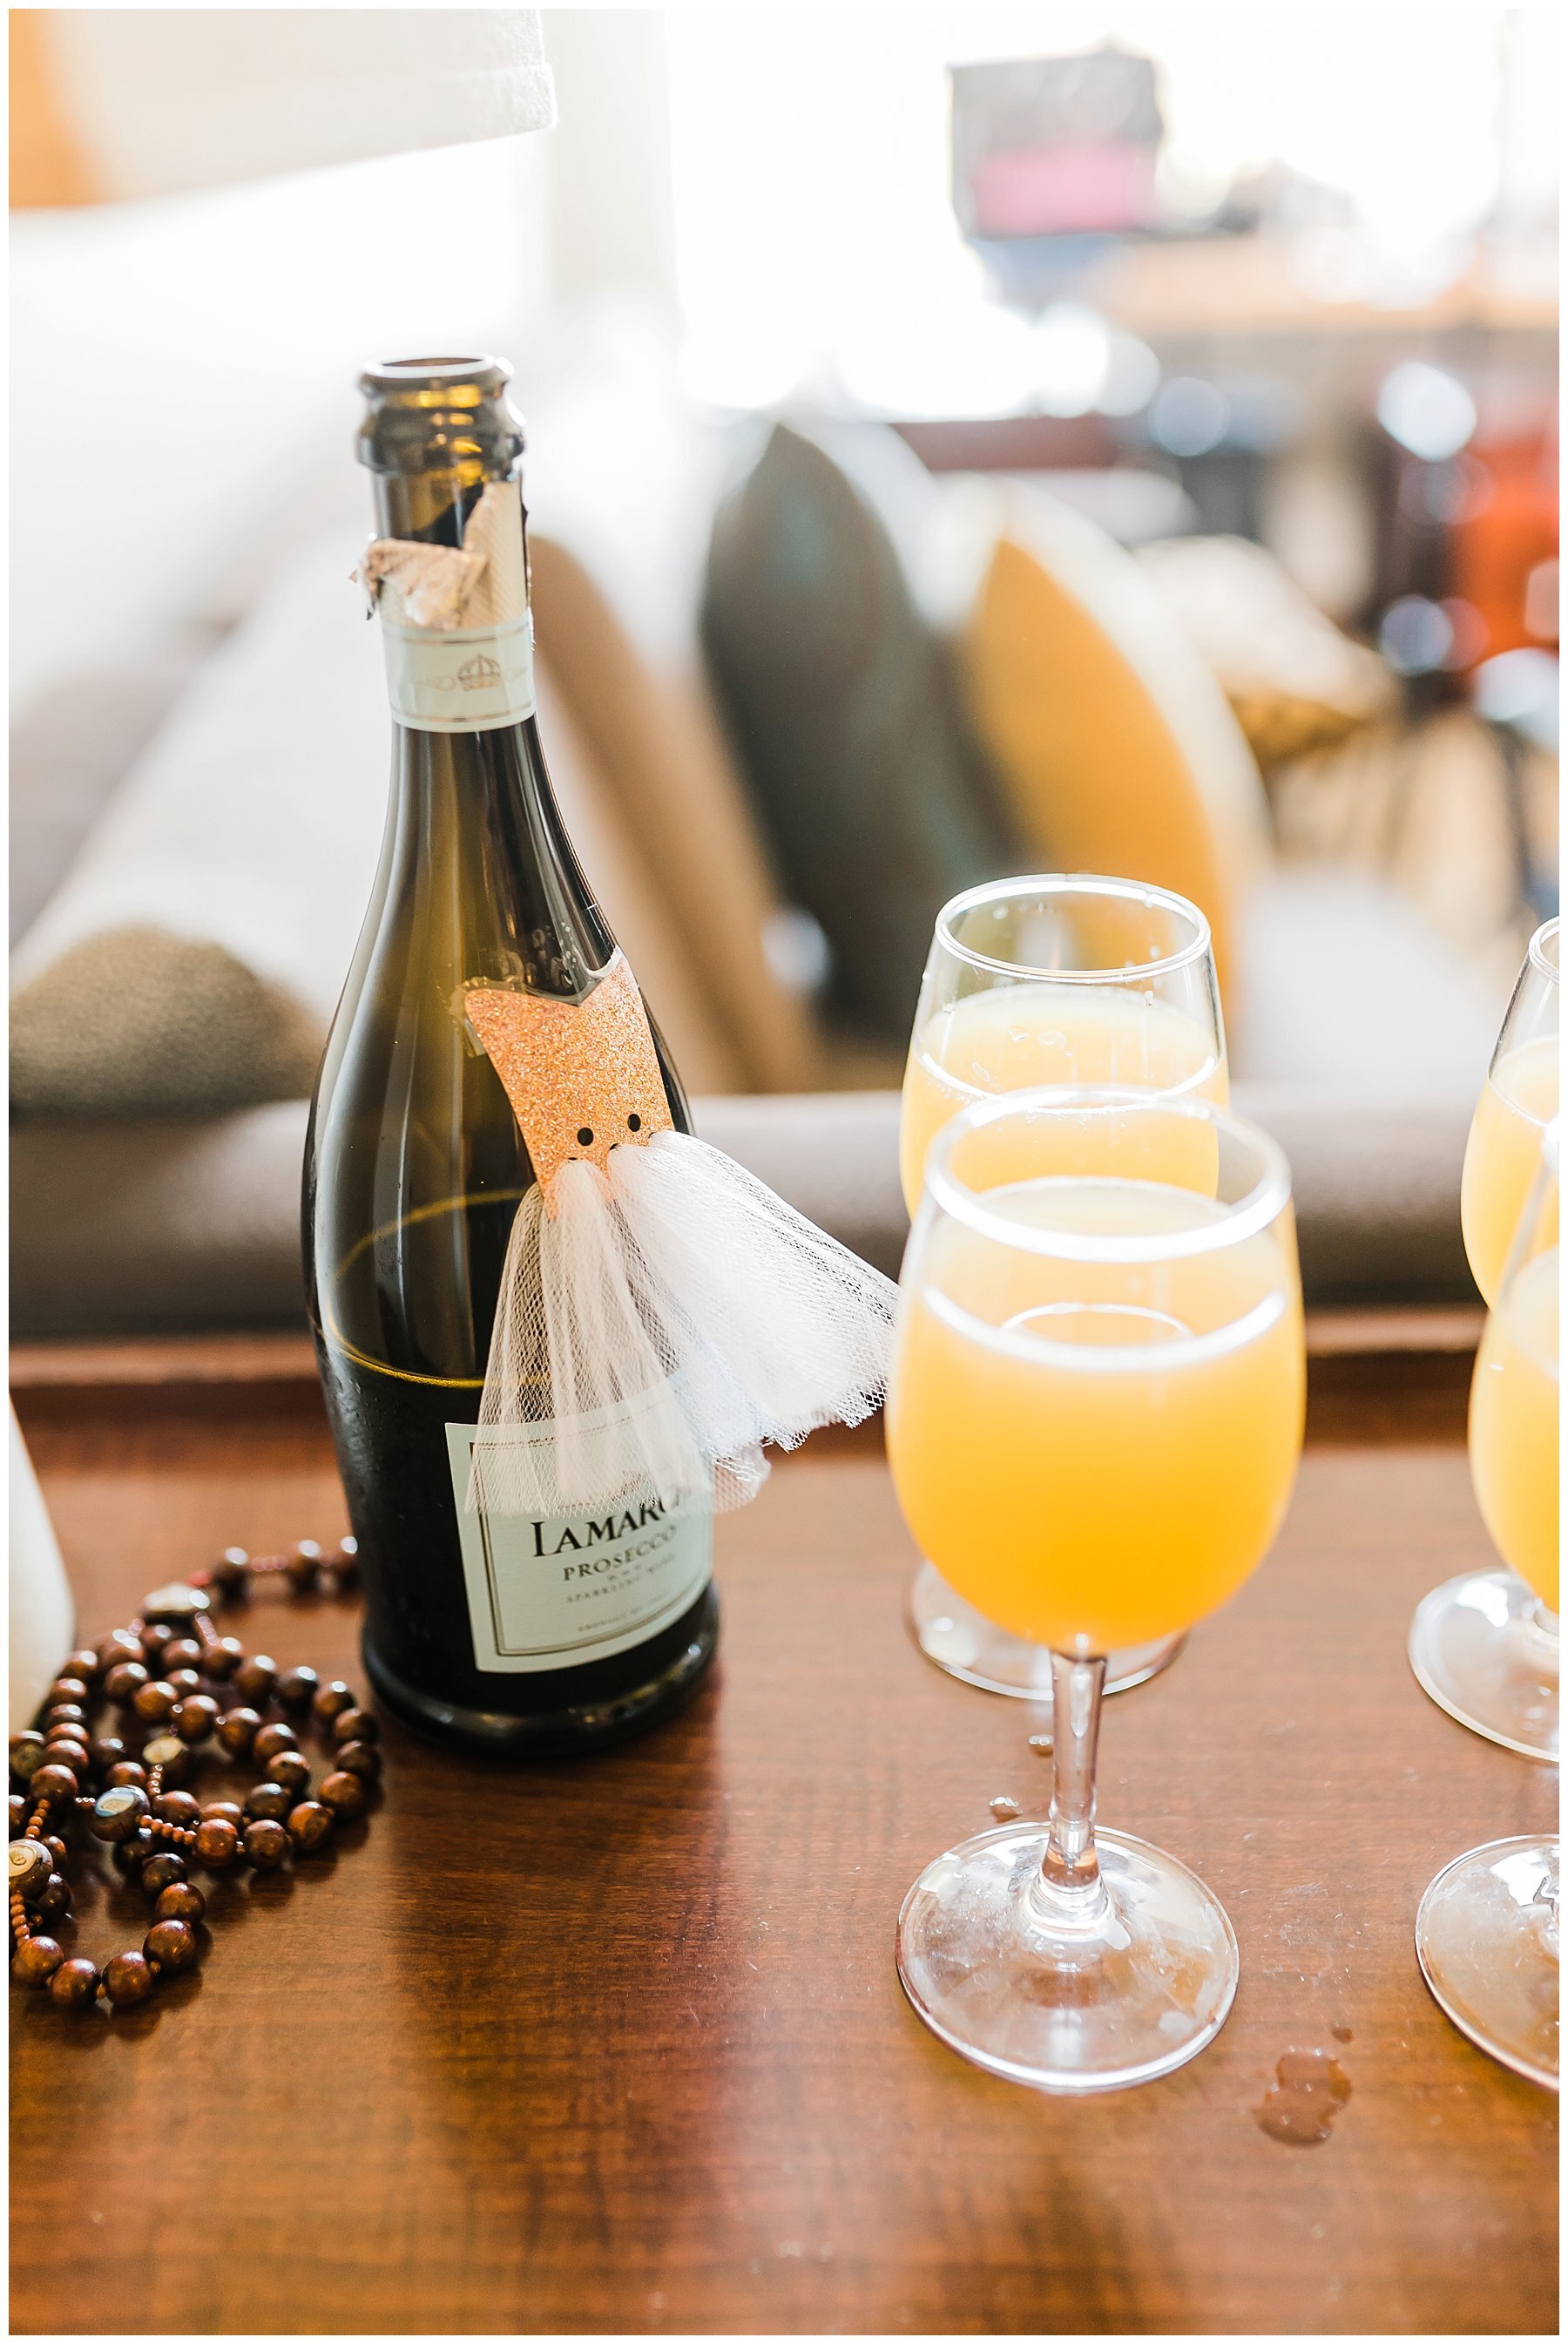  mimosas on the table with champagne bottle 